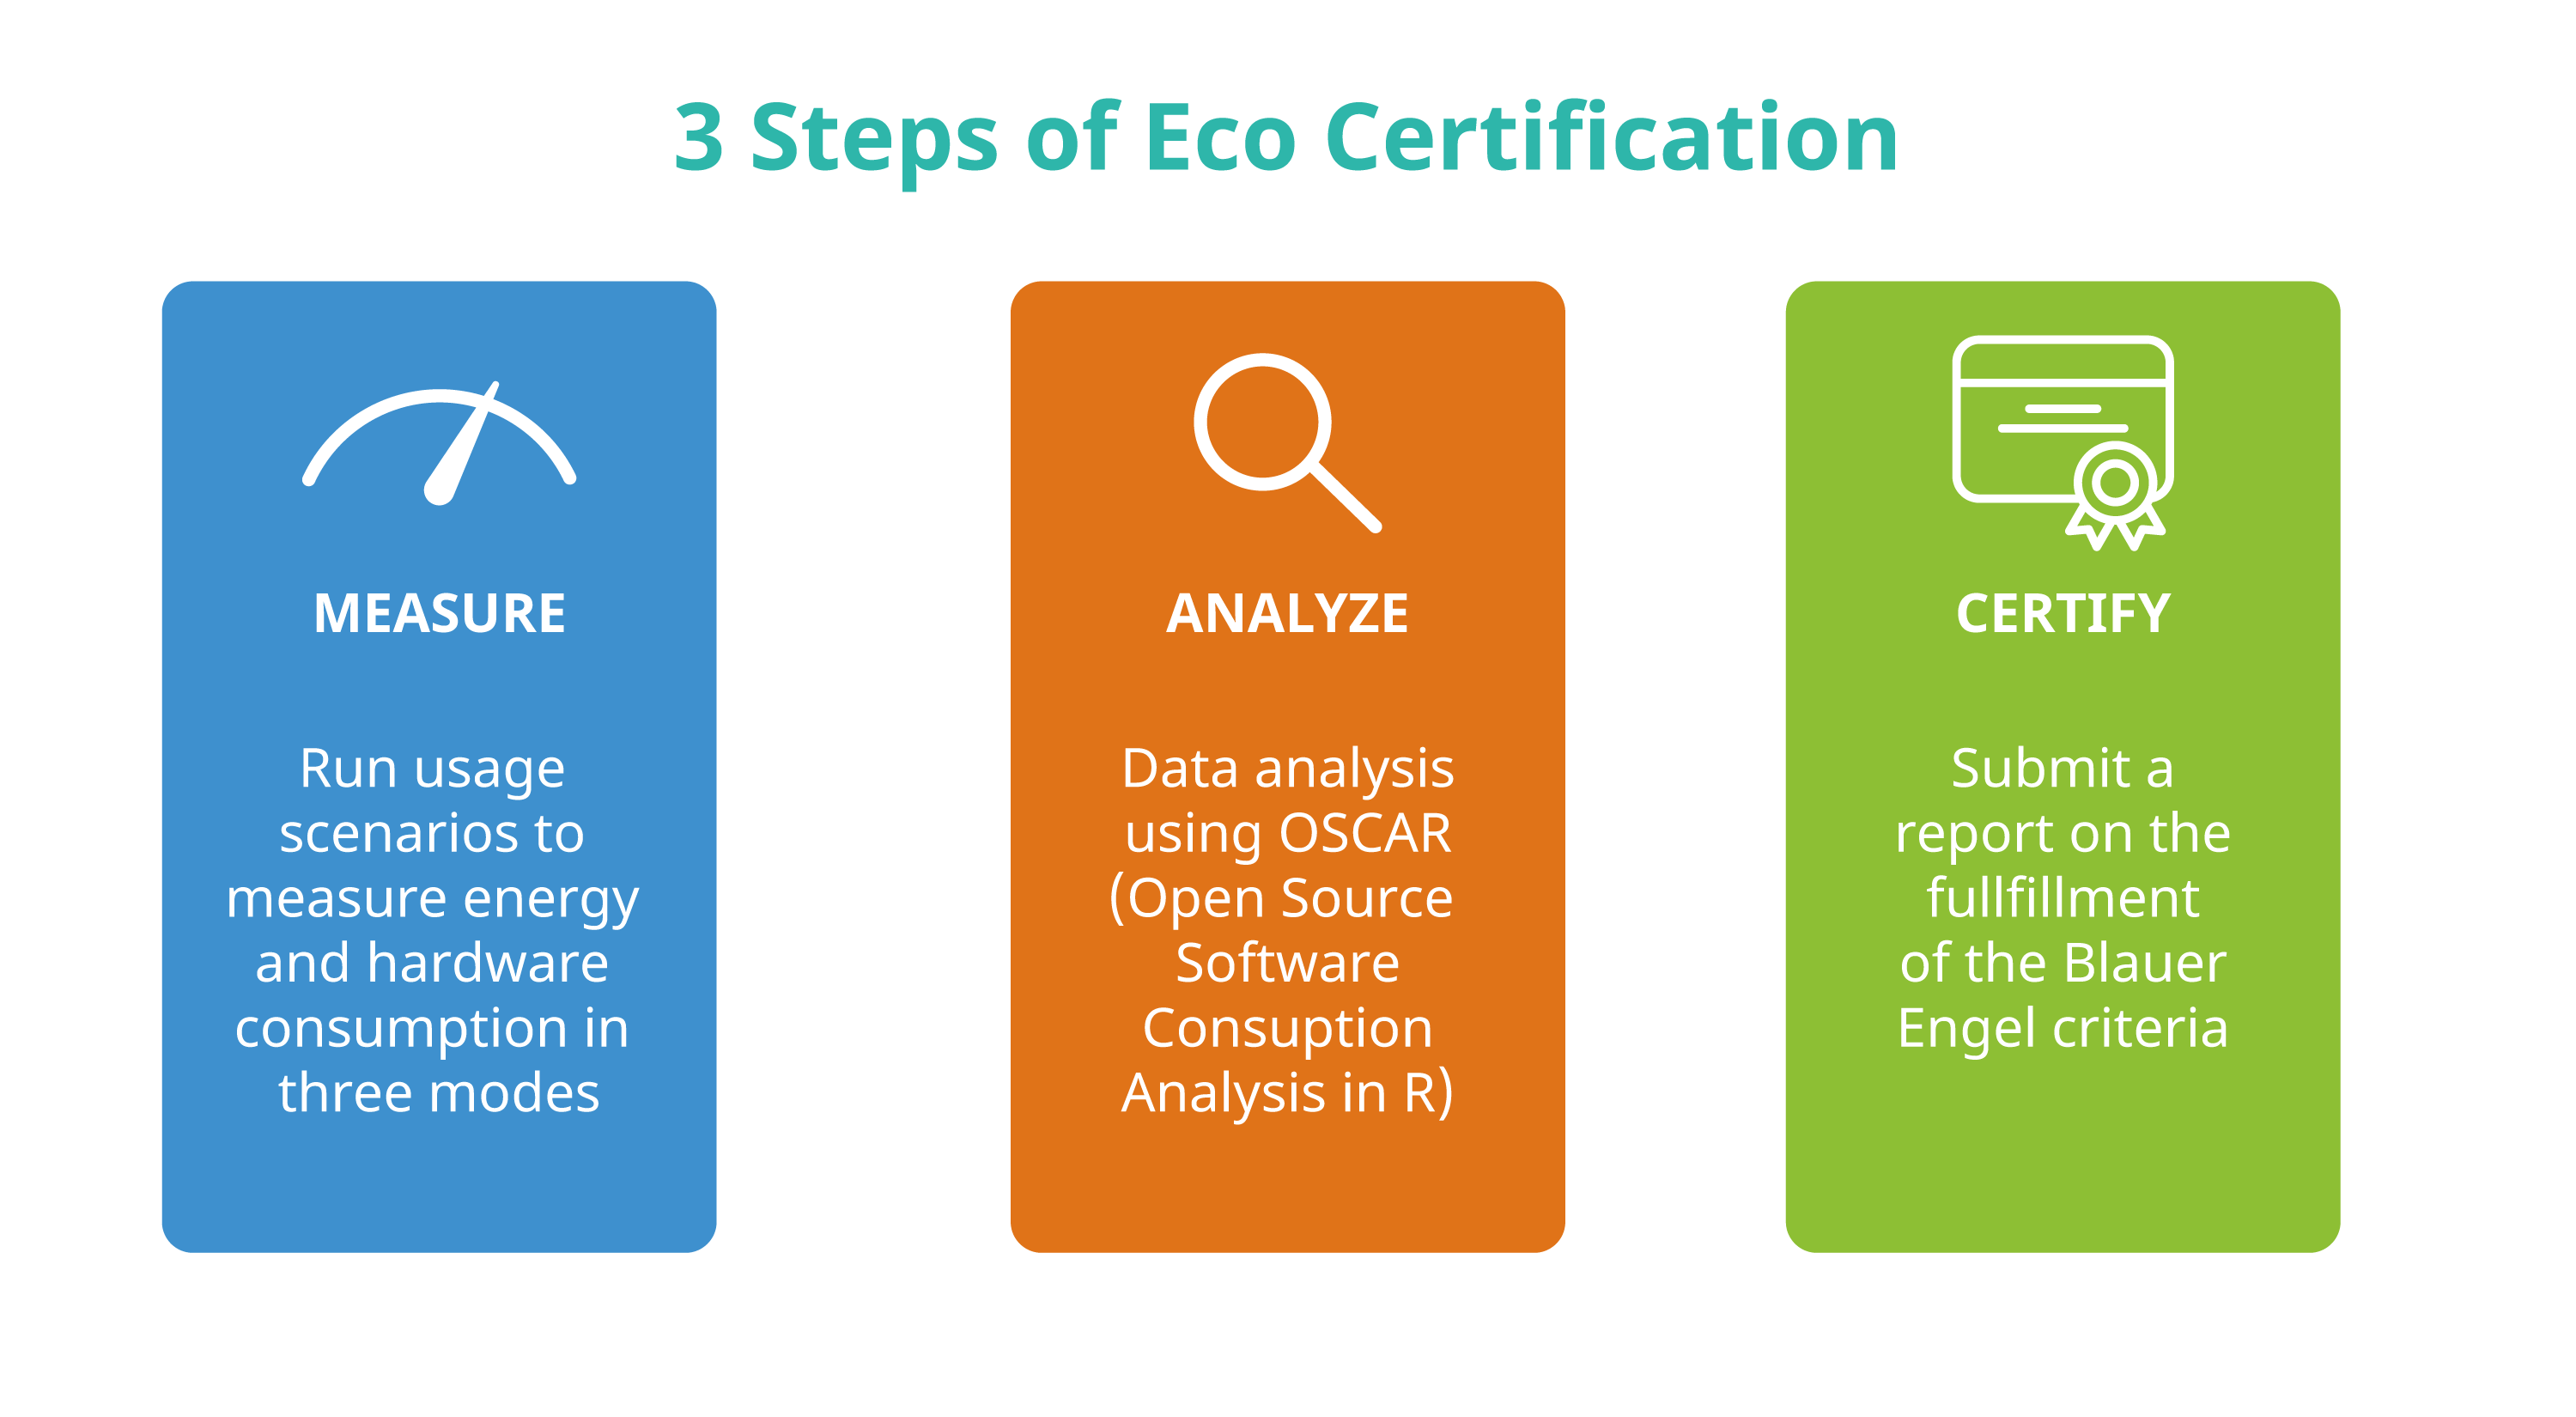 The three steps to eco-certification: Measure, Analyze, Certify. (Image from KDE published under a <a href="https://creativecommons.org/licenses/by-sa/4.0/deed.en">CC BY-SA 4.0 International</a> license. <a href="https://thenounproject.com/icon/certificate-5461357/">Certificate</a> icon by Ongycon licensed under a <a href="https://spdx.org/licenses/CC-BY-3.0.html">CC-BY</a> license.)